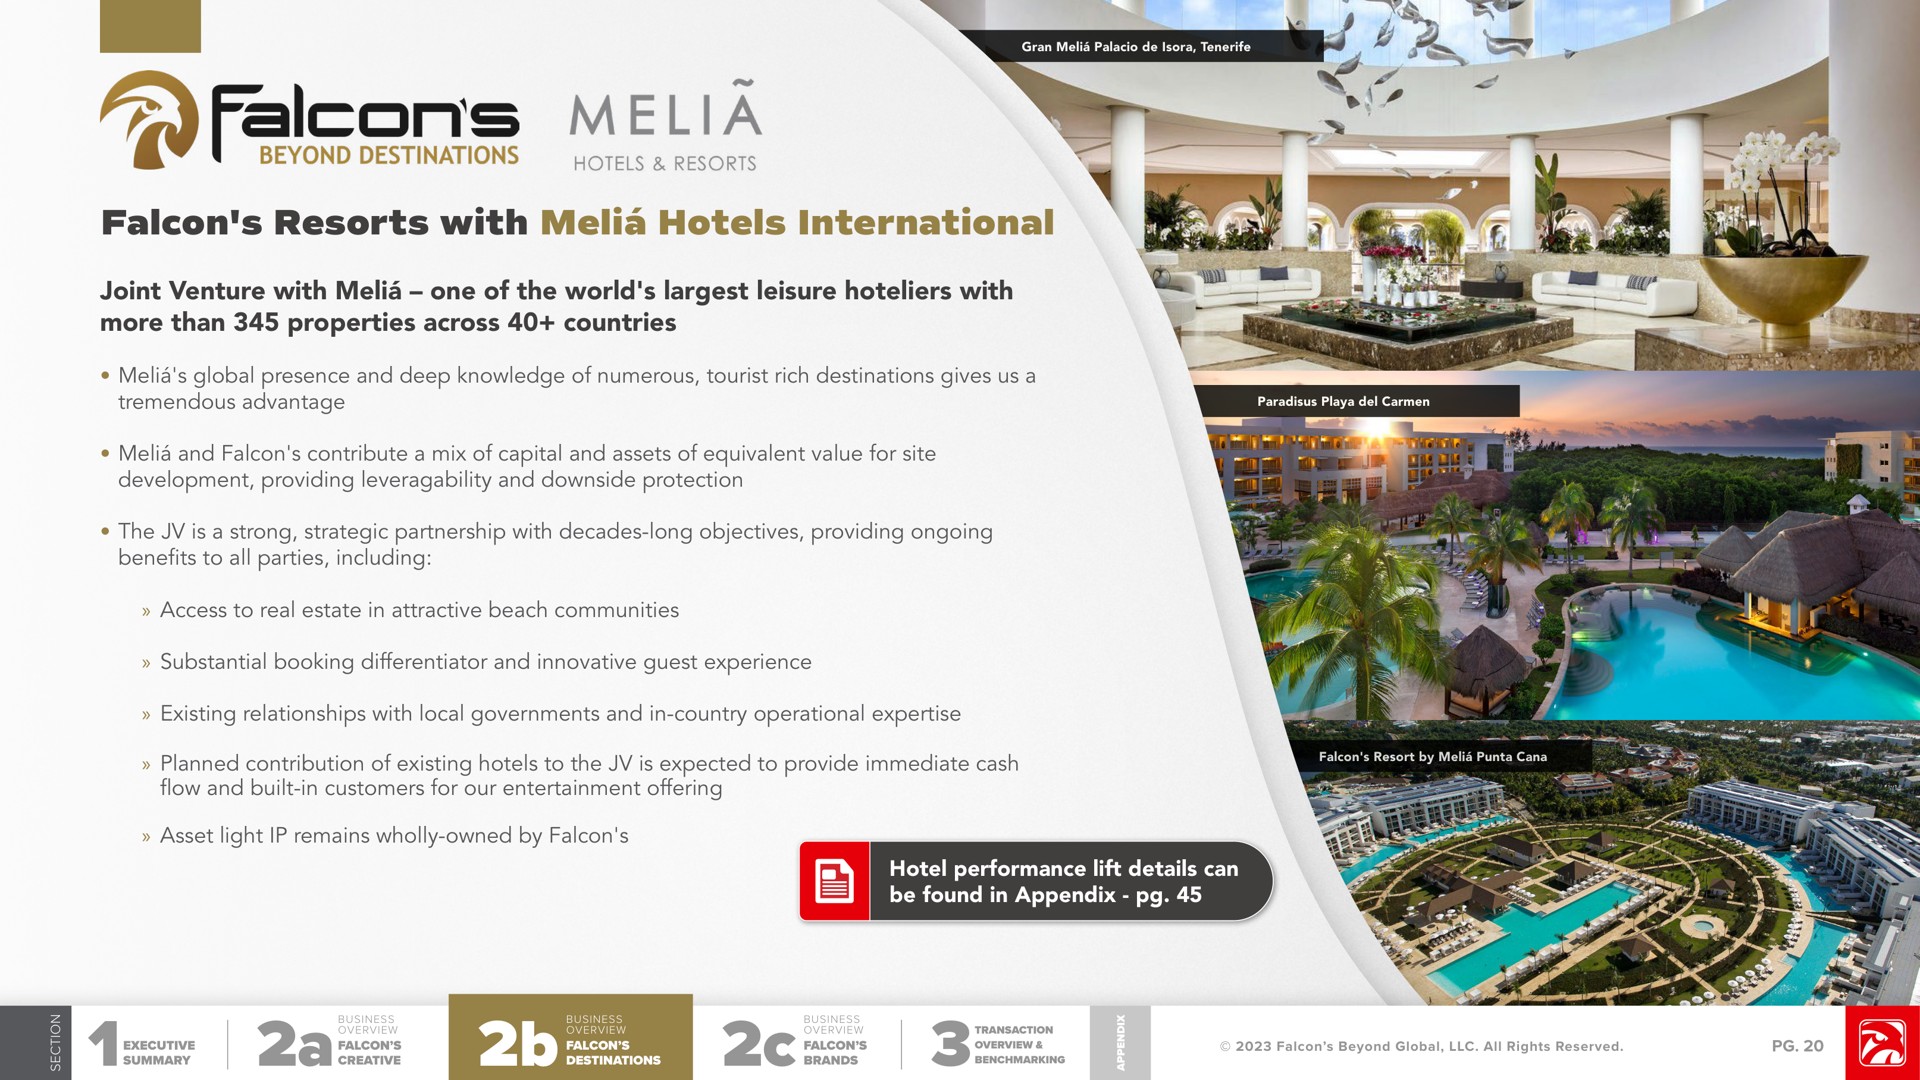 falcon resorts with hotels international joint venture with one of the world leisure hoteliers with more than properties across countries a beyond destinations ores | Falcon's Beyond